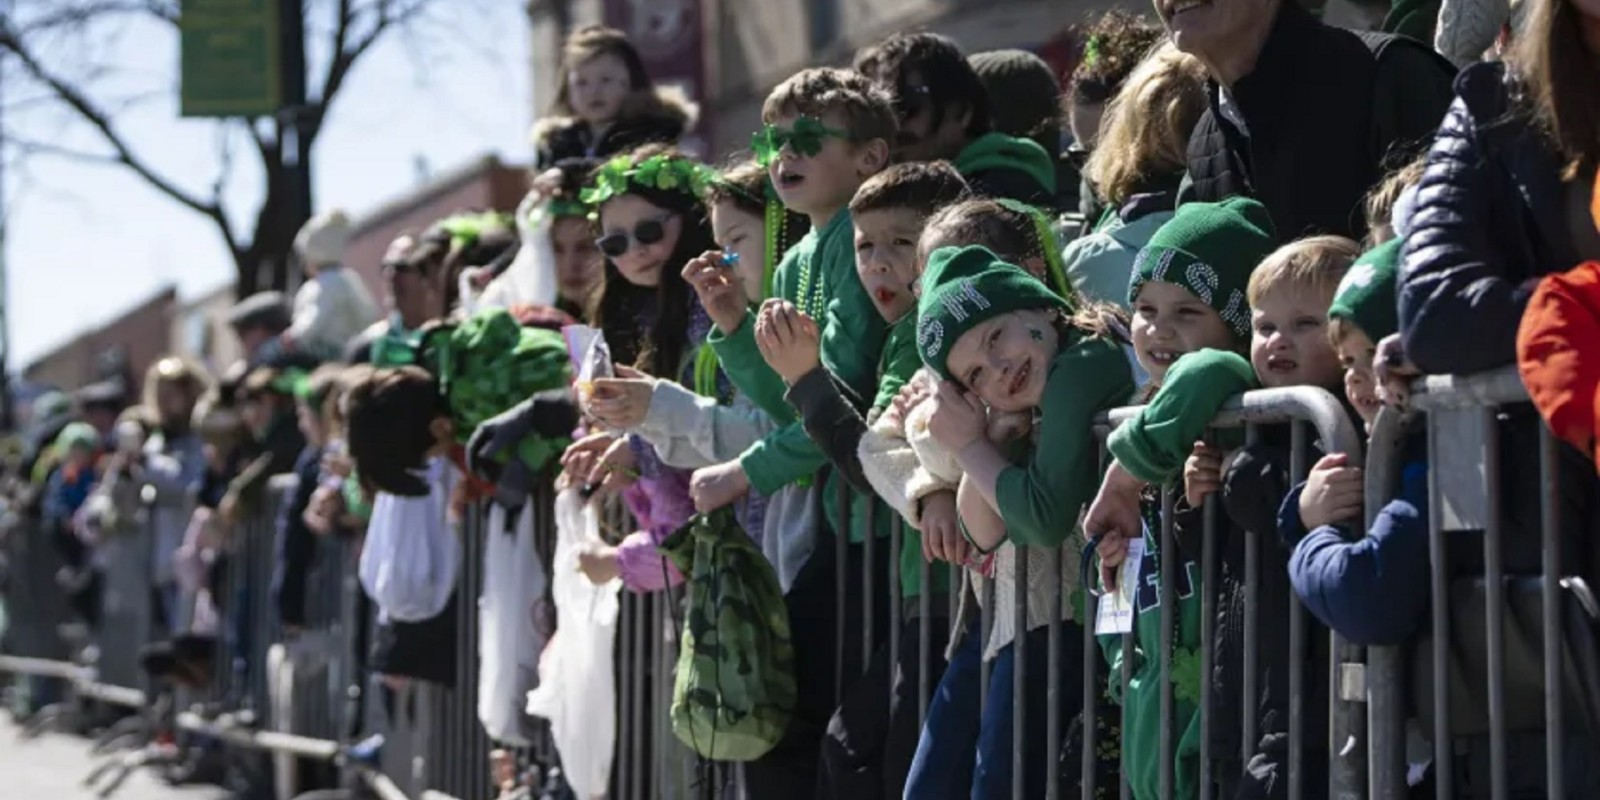 South Side Irish Parade covers Chicago’s Beverly neighborhood in a sea